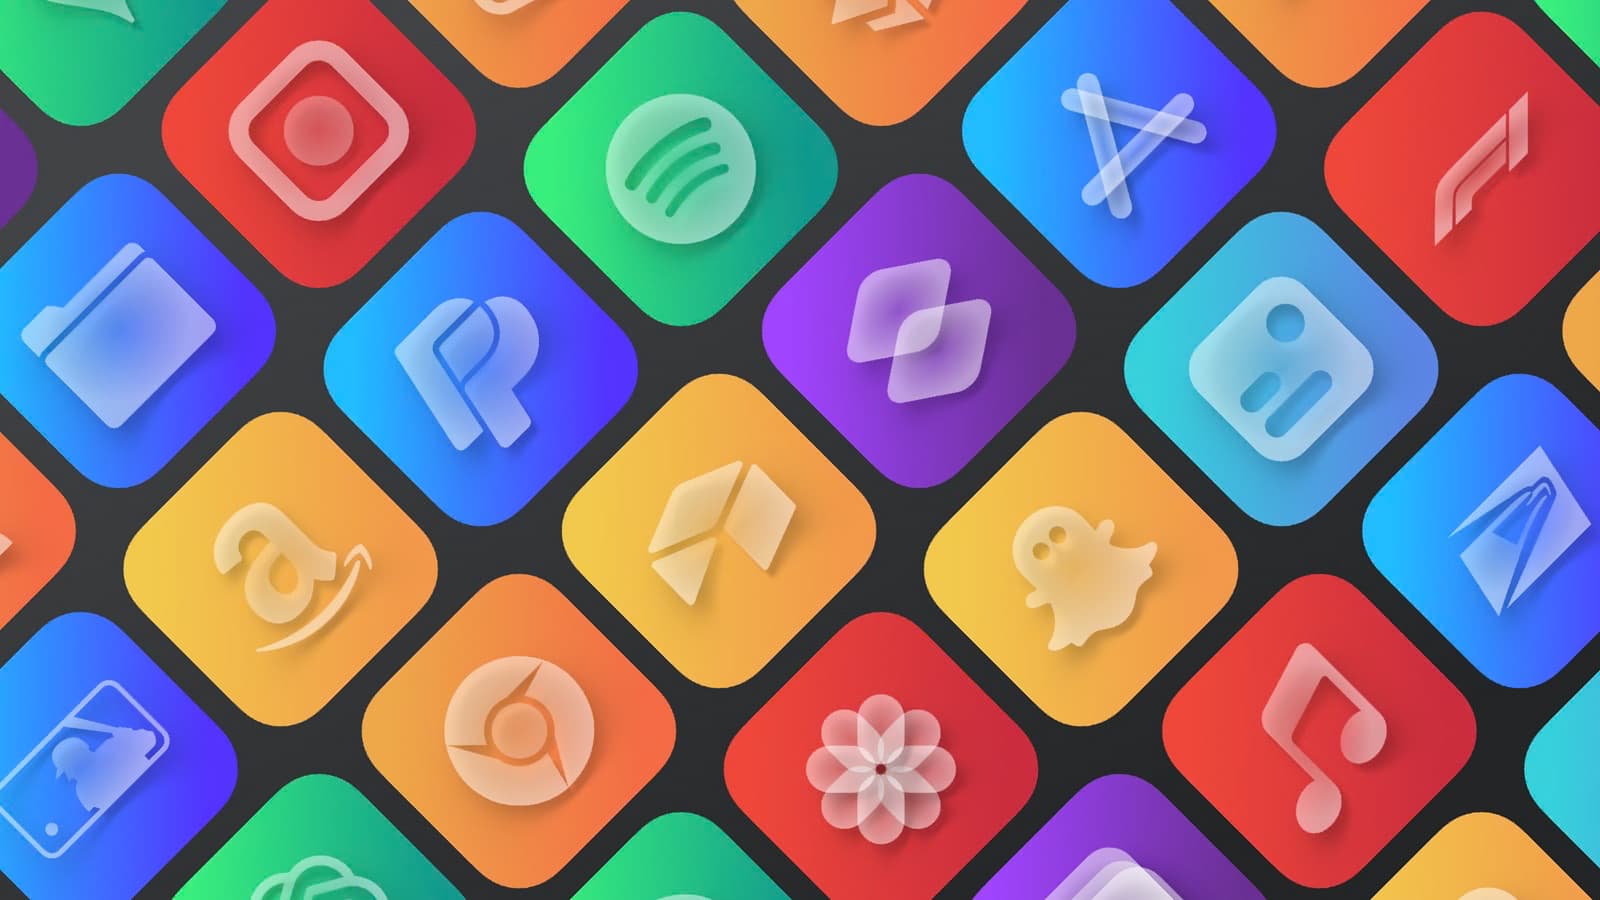 Ripple theme gives your Home Screen’s icons a colorful, yet subdued look